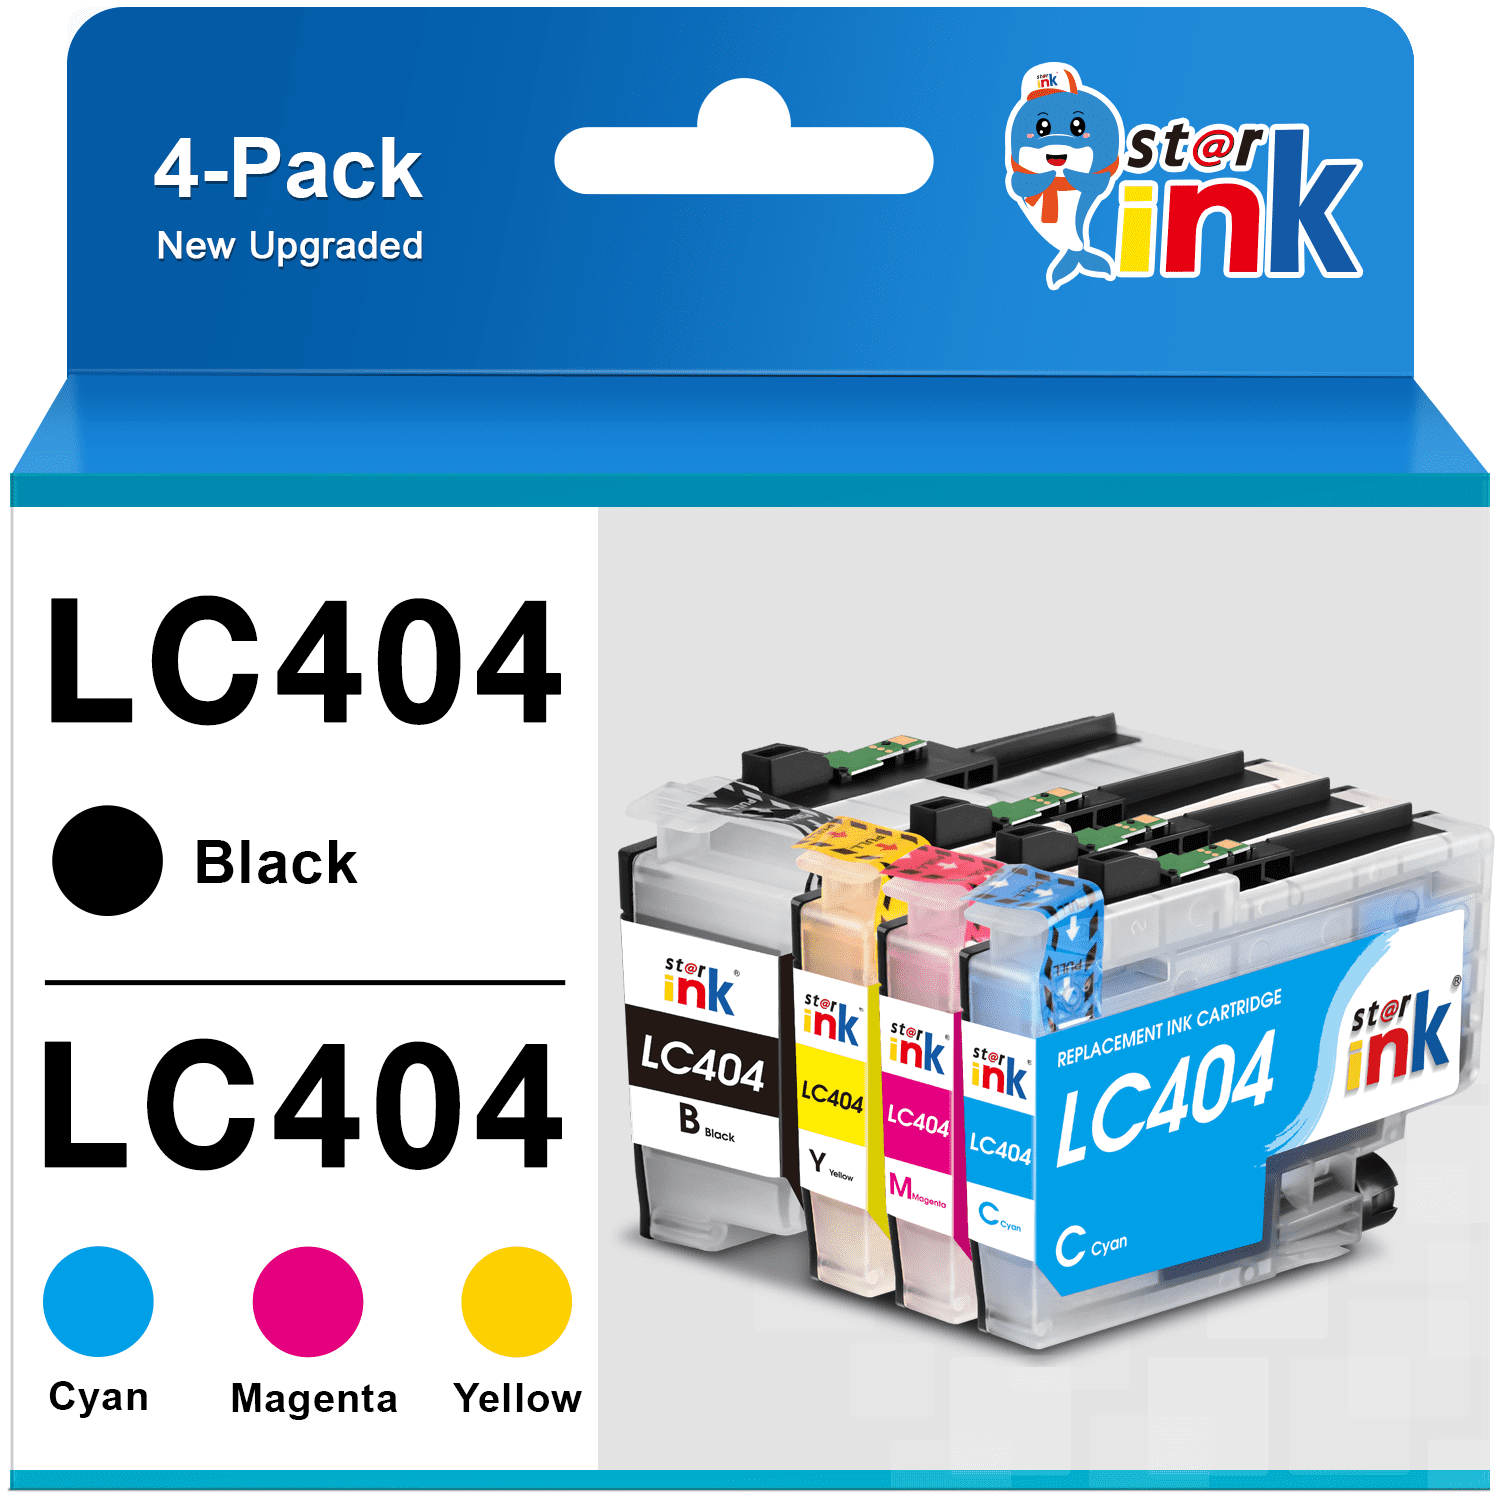 ✓ Pack compatible BROTHER LC-123 4 cartouches couleur pack en